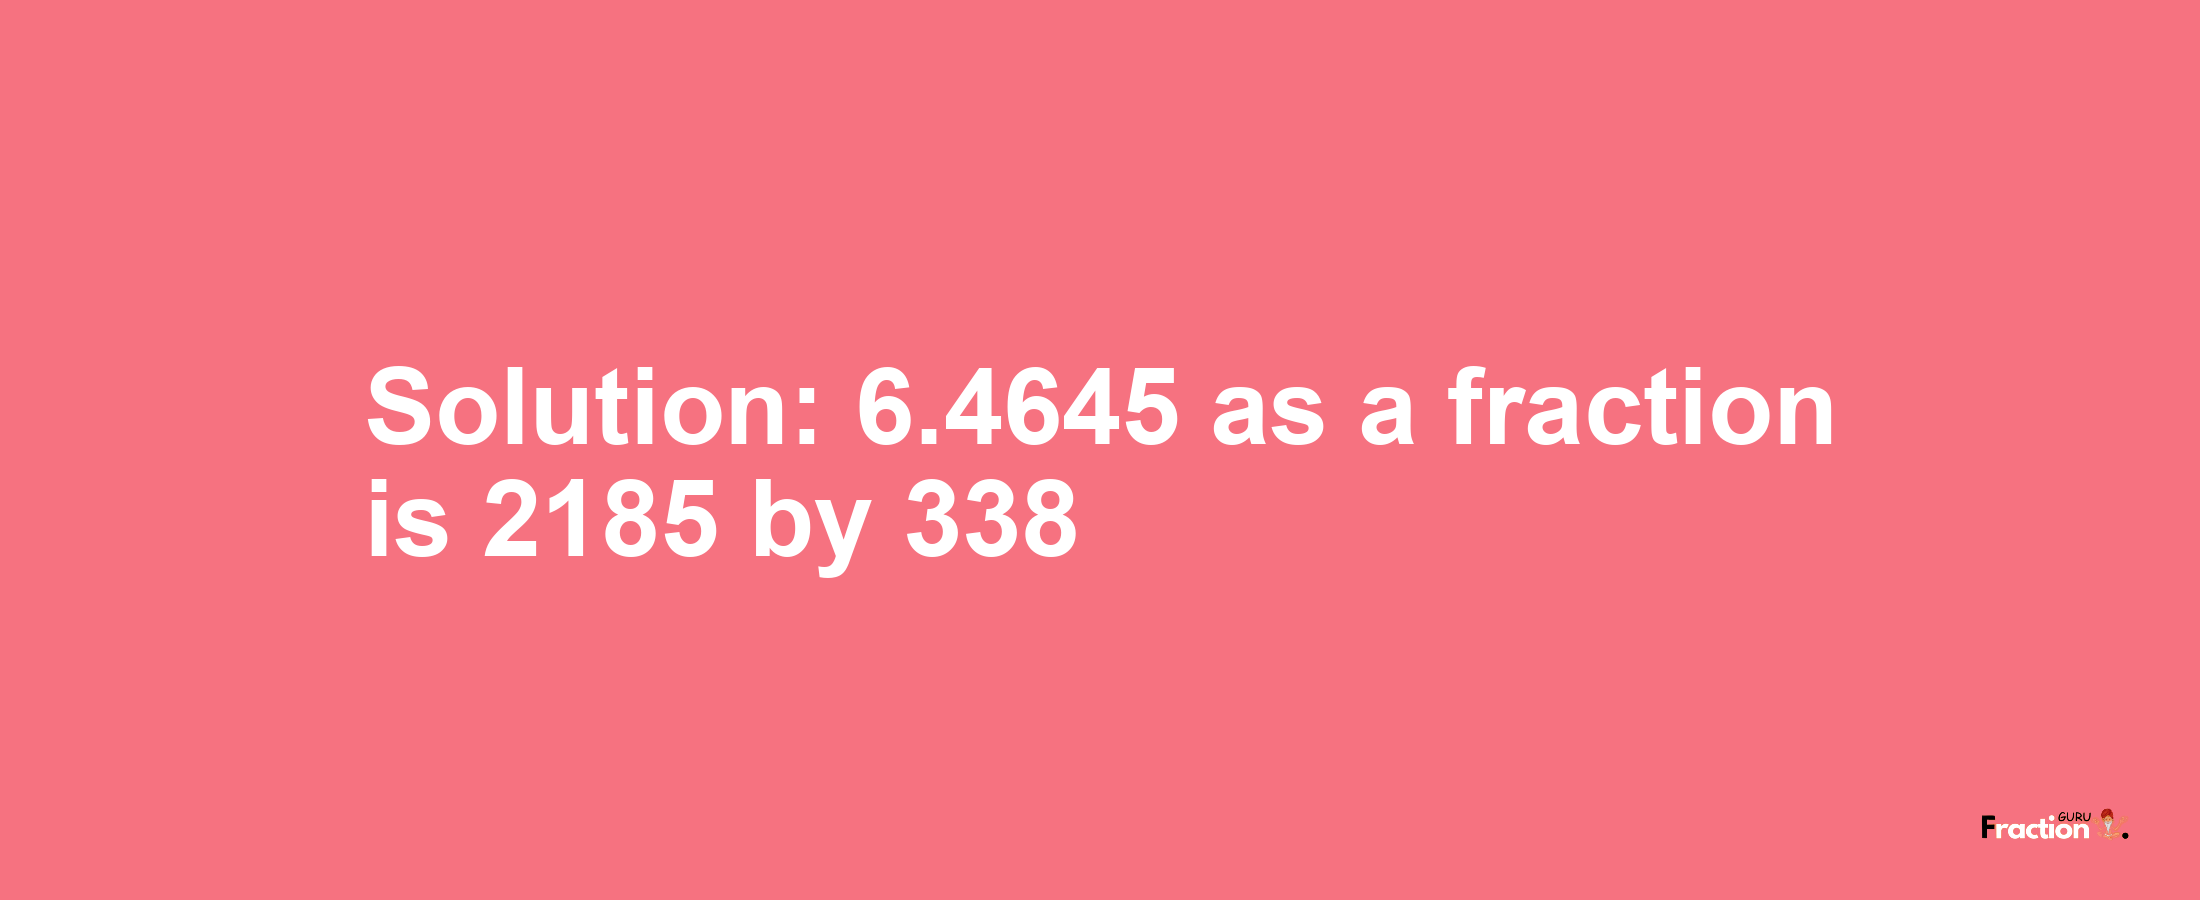 Solution:6.4645 as a fraction is 2185/338